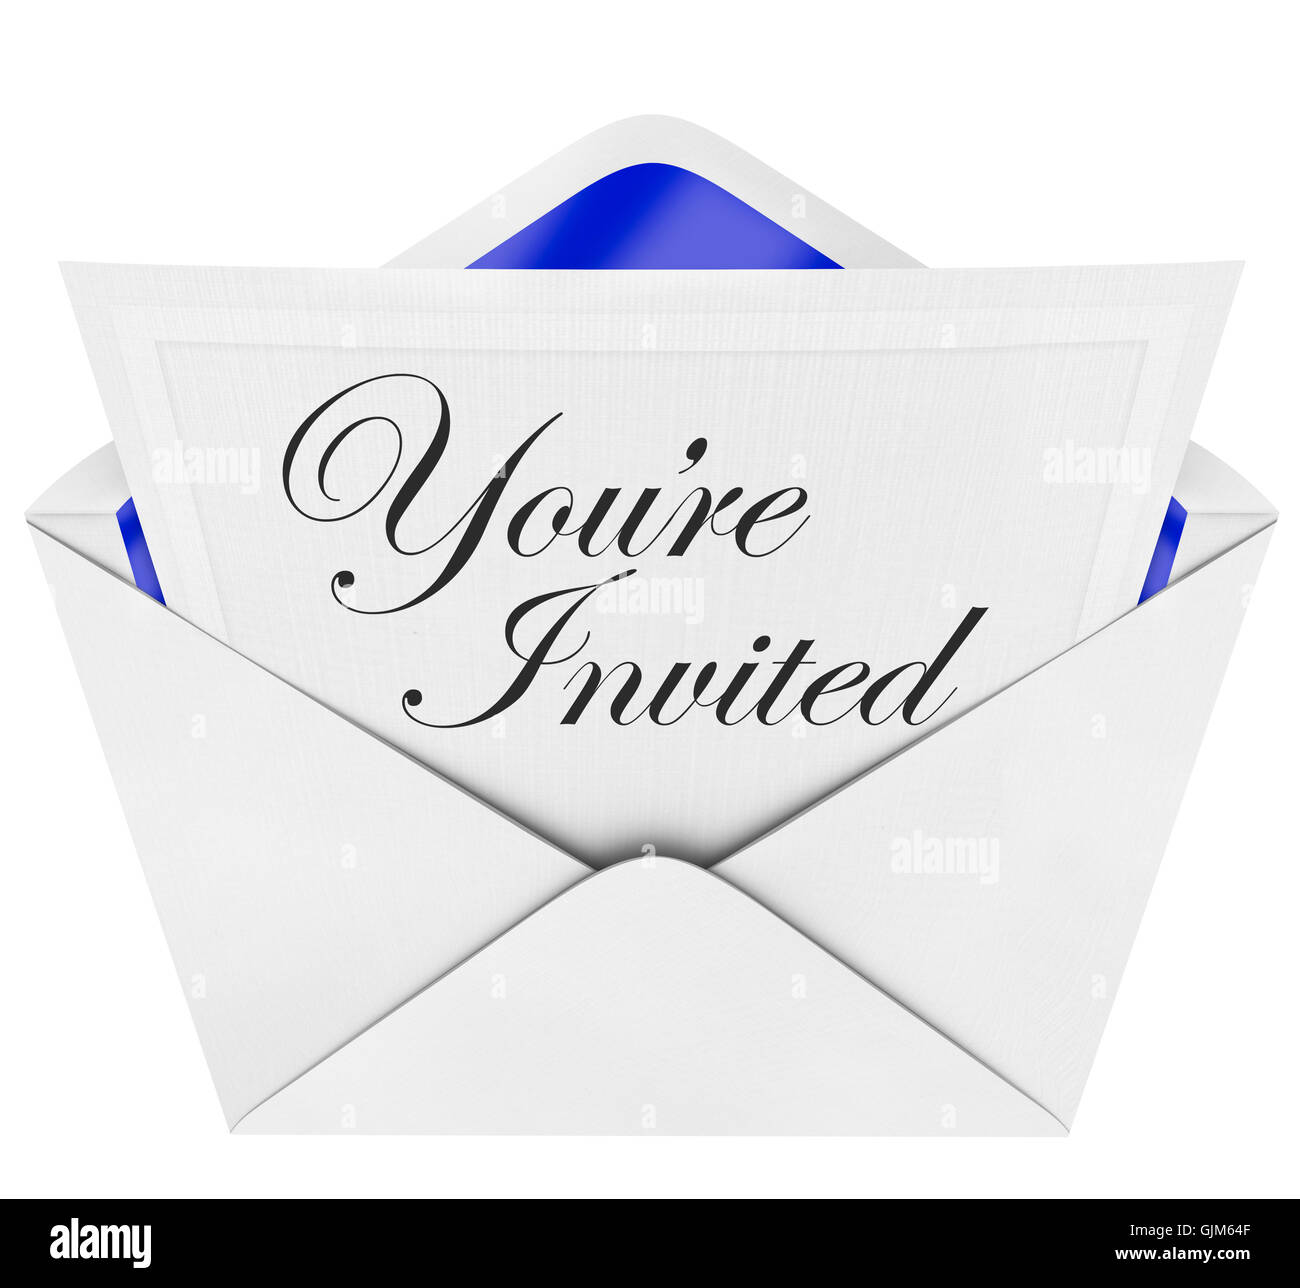 You're Invited - Invitation and Open Envelope Stock Photo